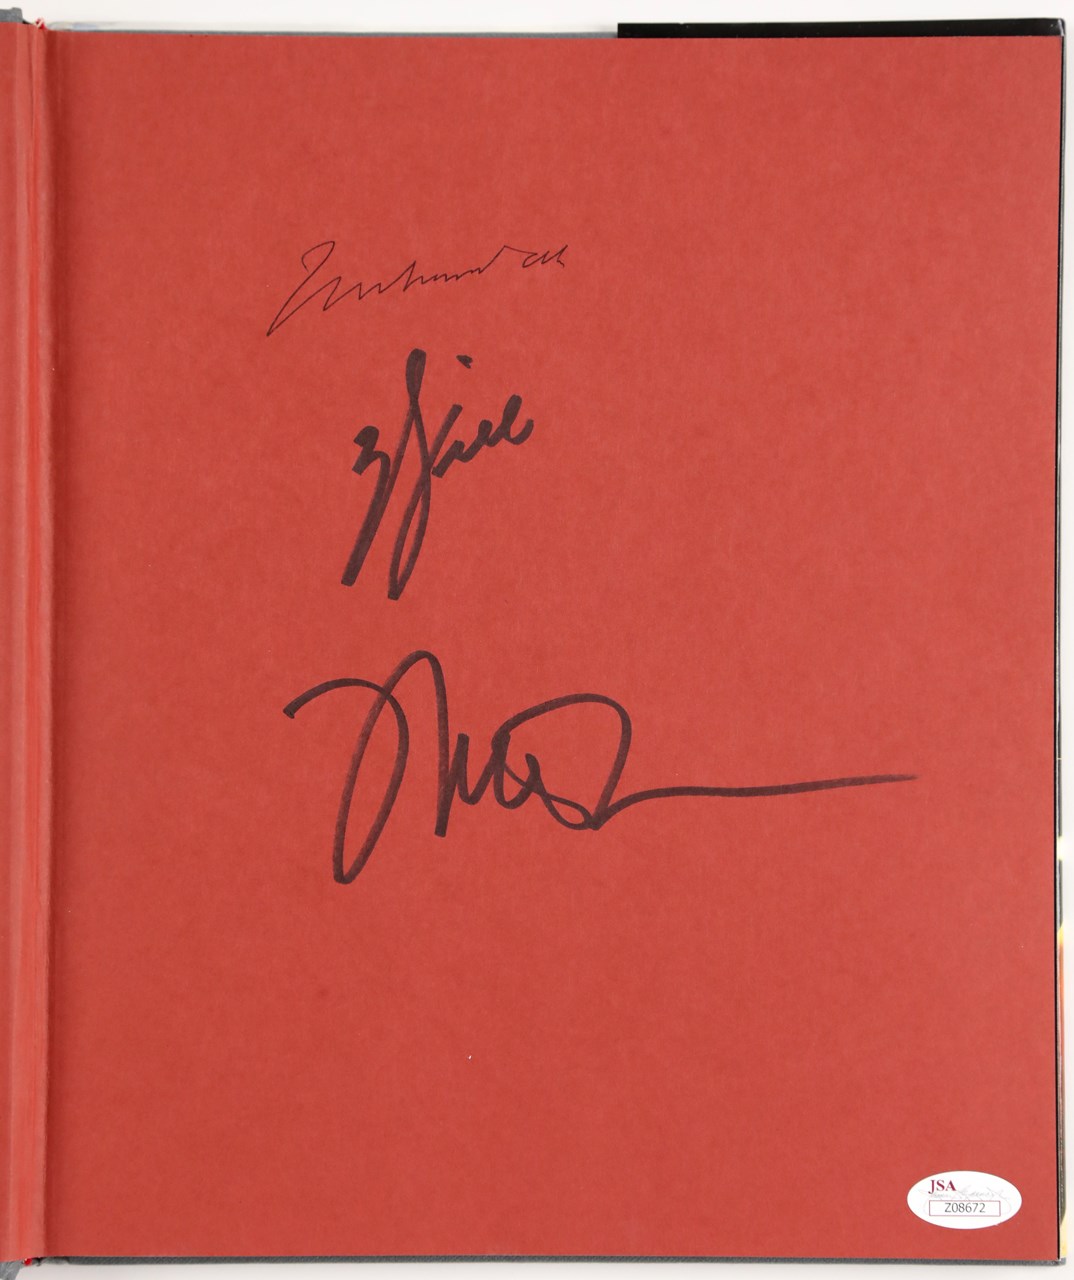 Muhammad Ali & Boxing - Special "Ali" Book Signed by Muhammad Ali, Will Smith, & Director Michael Mann - Gifted to Hollywood Press Member for Golden Globe Nomination (JSA)